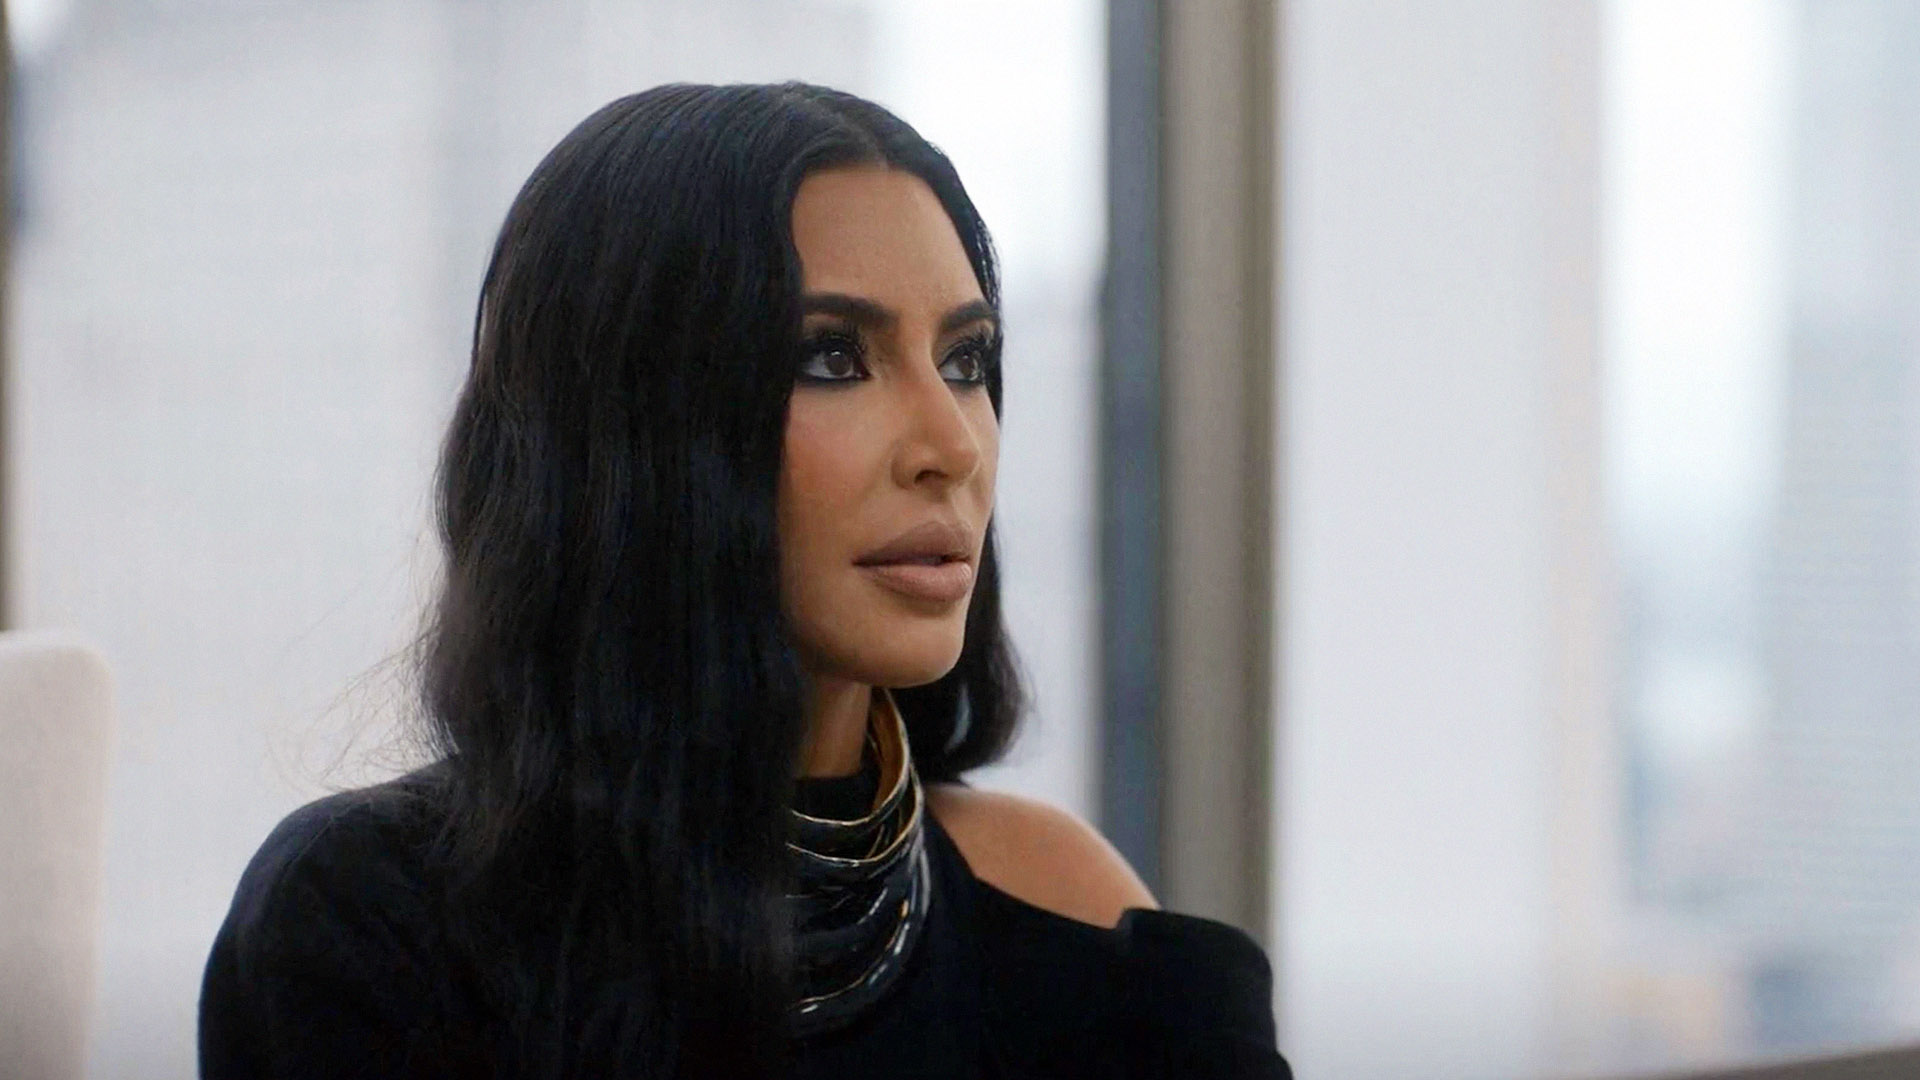 Kardashian's Charm: Kim Will Star in AHS Creator's Legal Drama After Her Work on Delicate